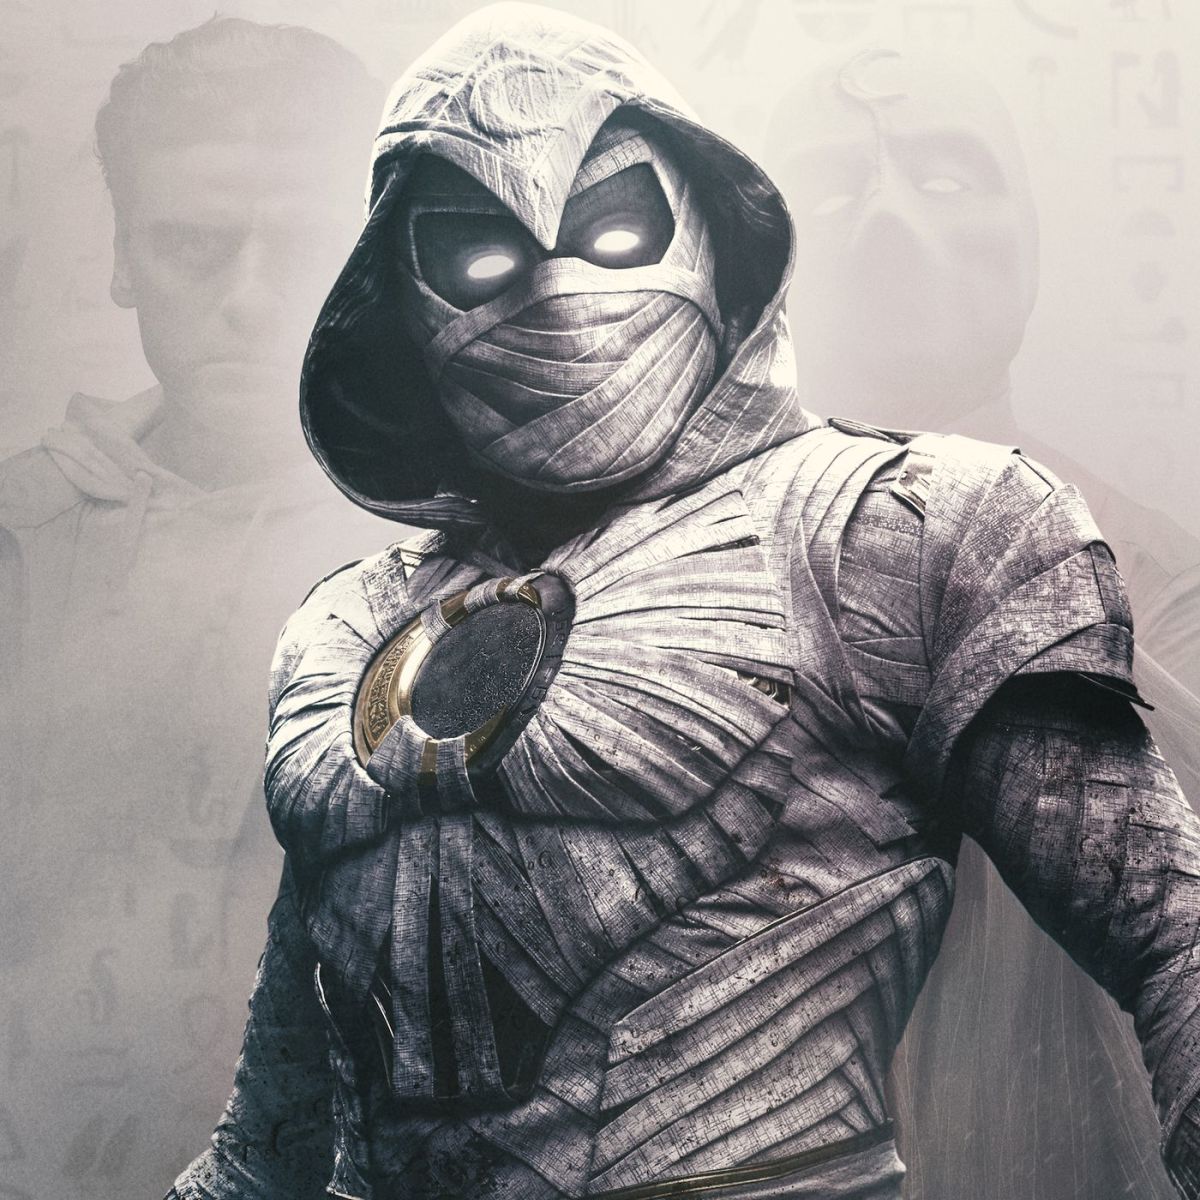 How Accurate Was Moon Knight's Dissociative Identity Disorder Portrayal